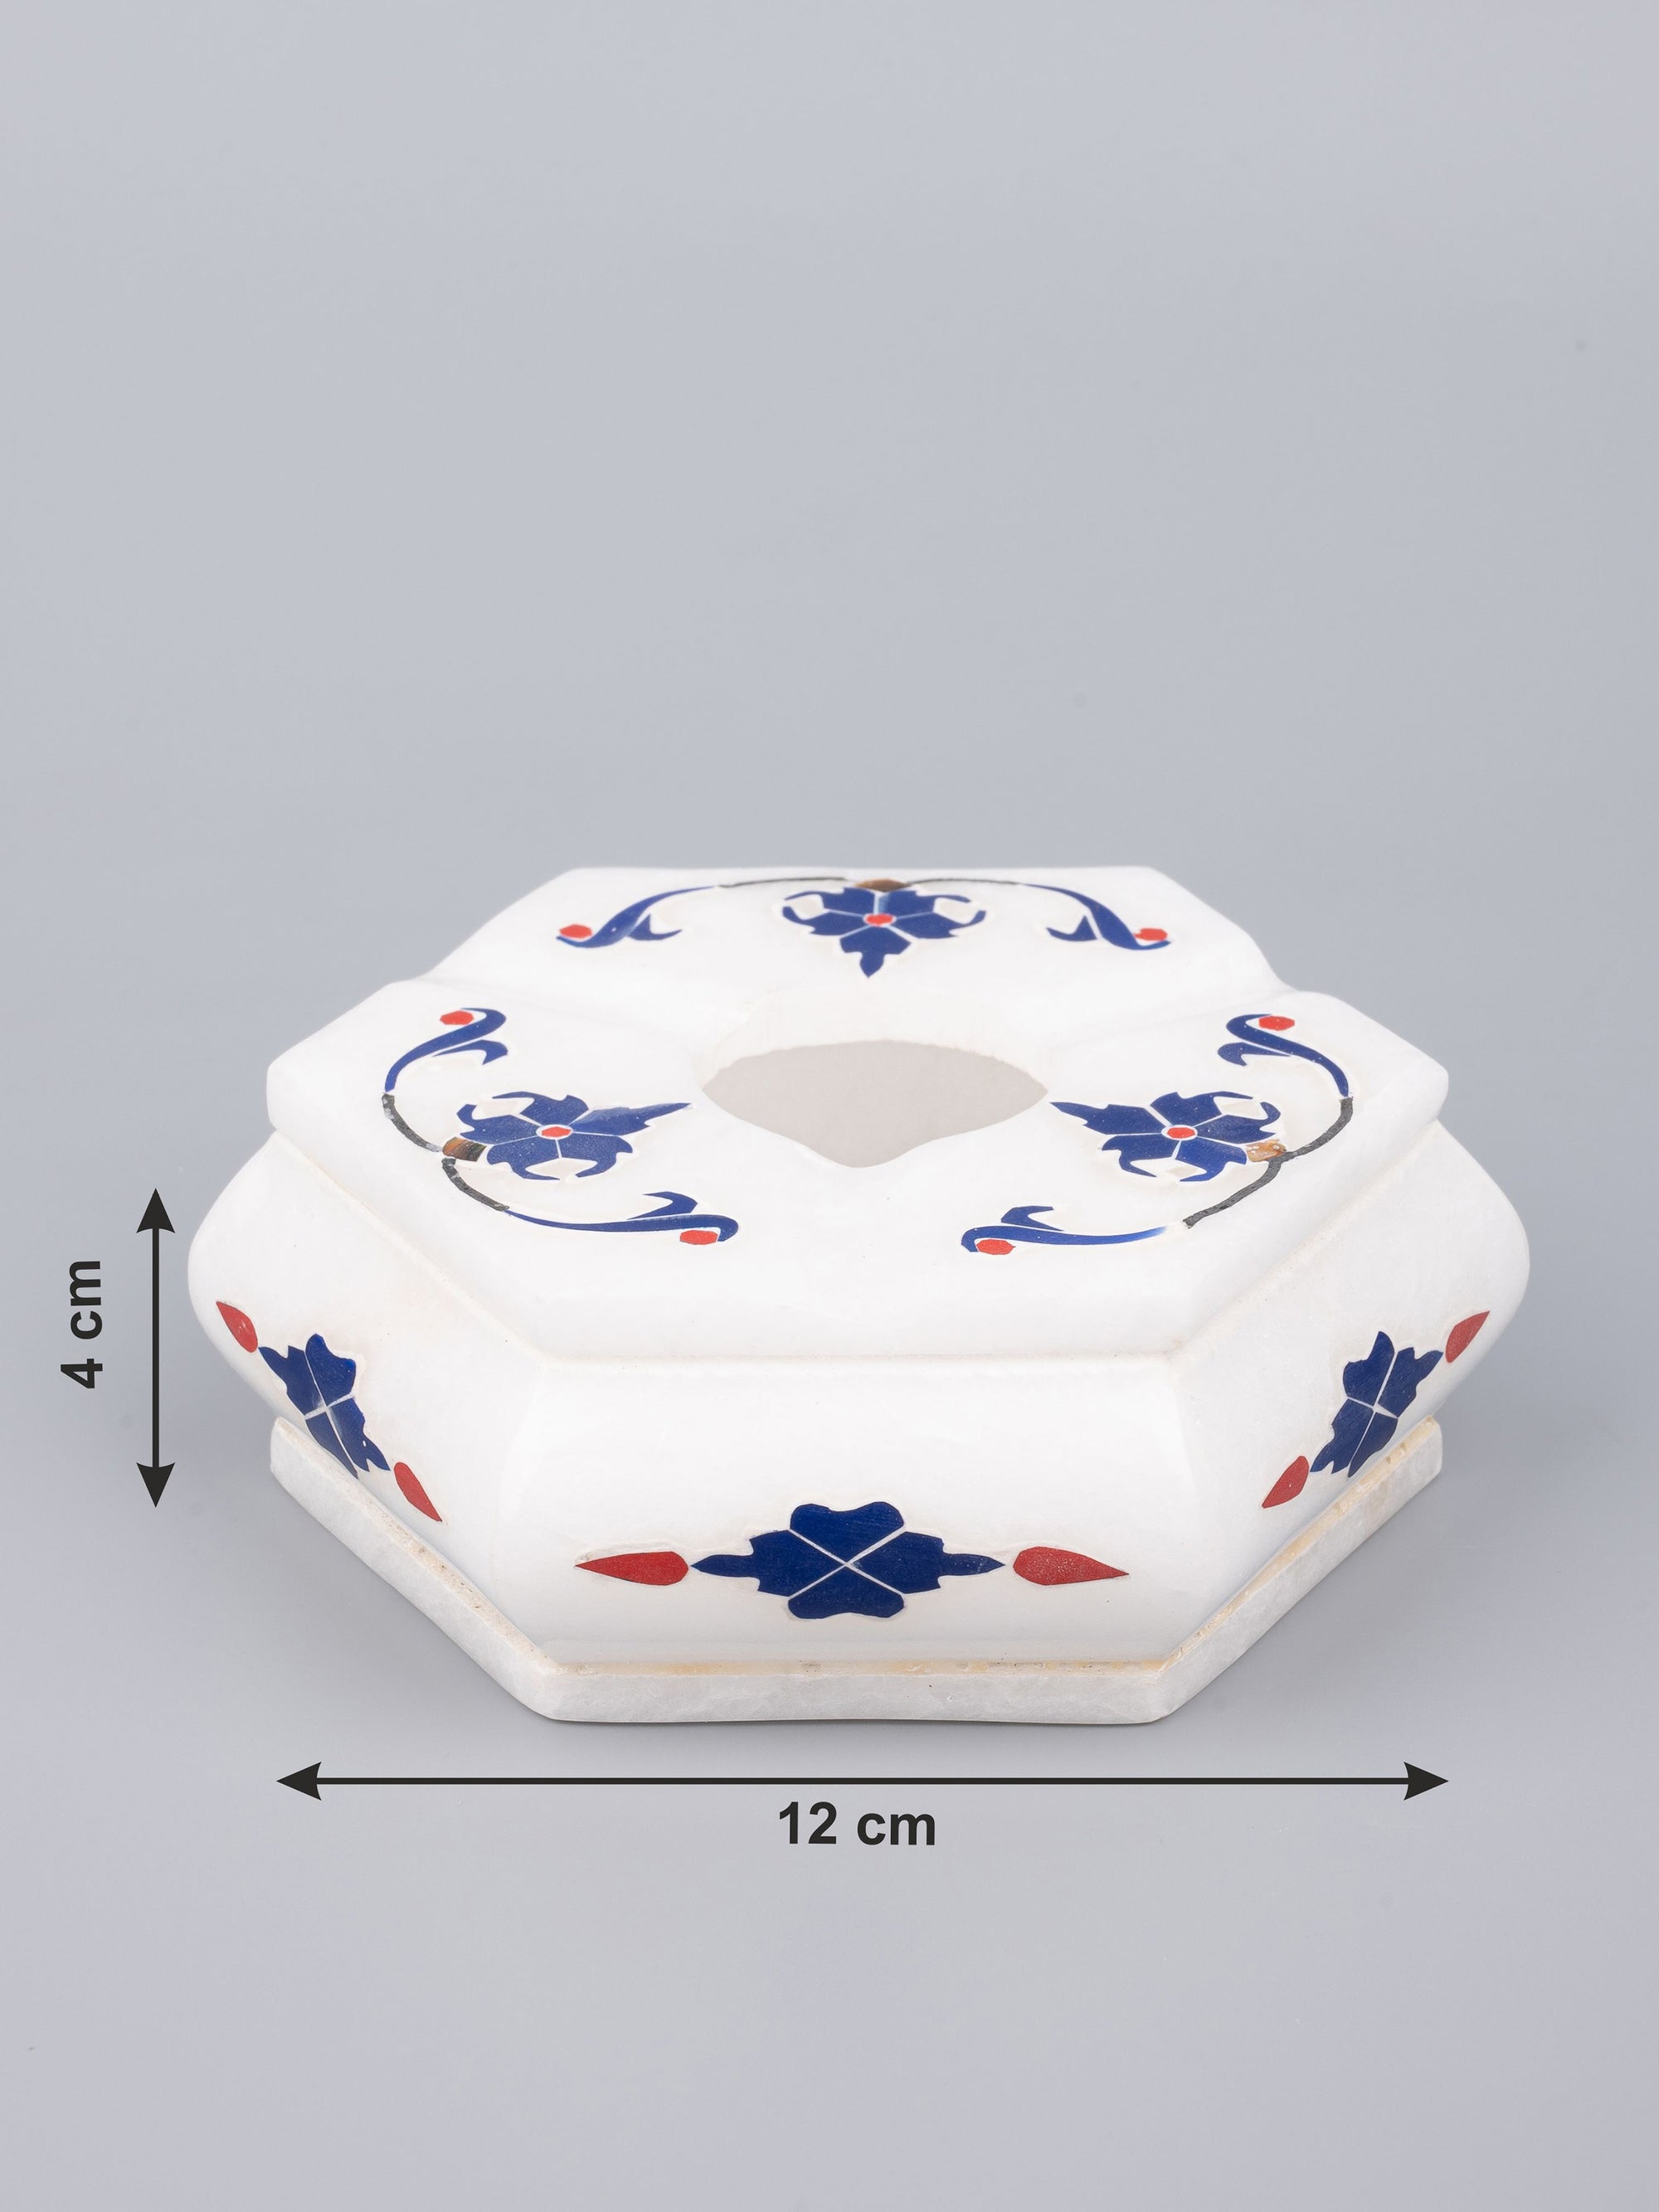 Hexagonal marble Ashtray with blue flower inlay work - The Heritage Artifacts